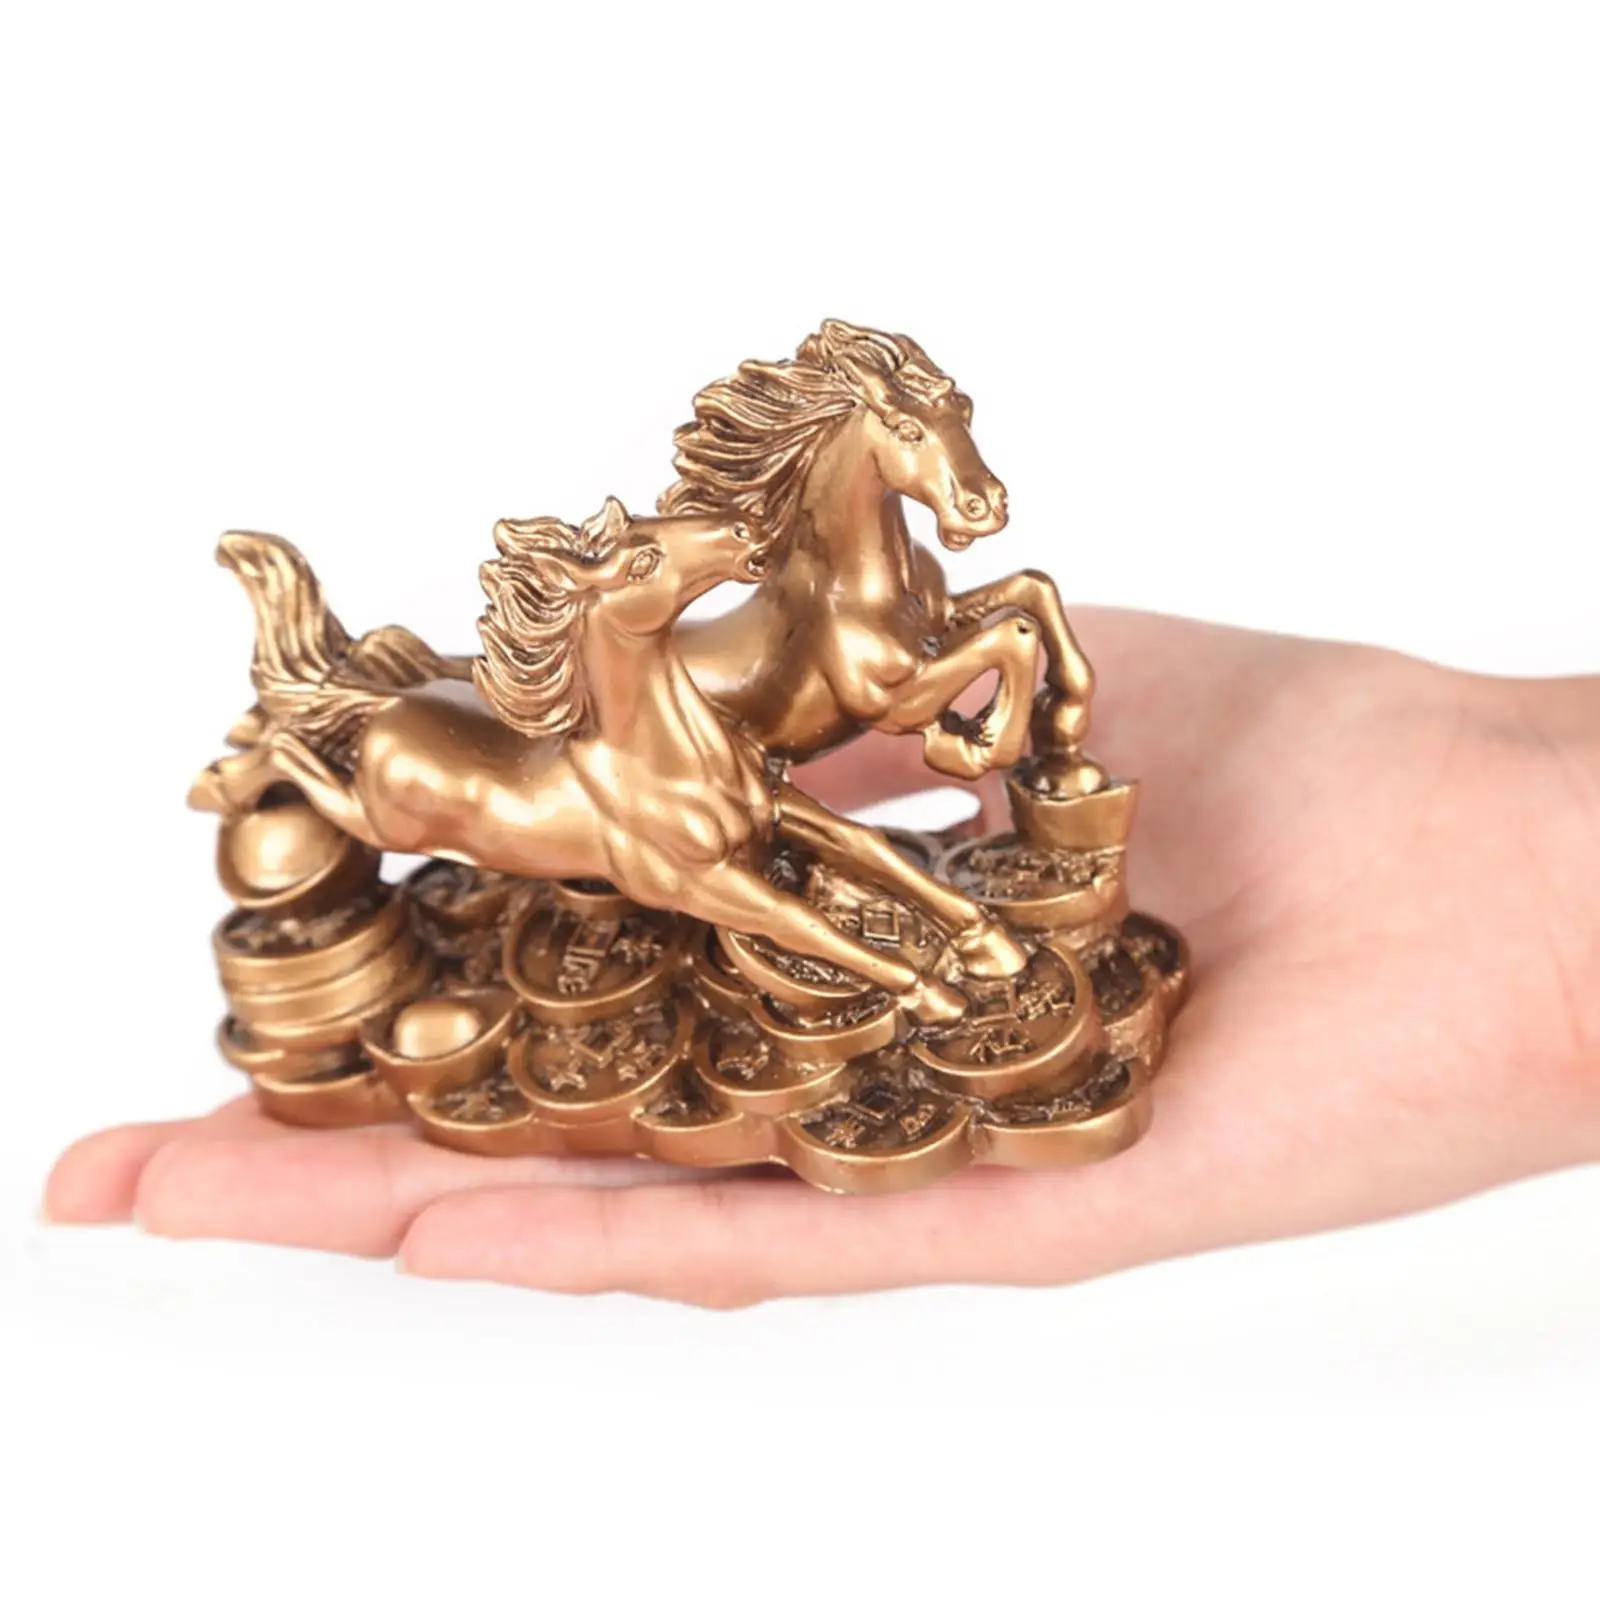 Running Two Horses Statue Sculpture Decorative Figurine Collectible Feng Shui Two Galloping Horses Statue for Indoor Decoration